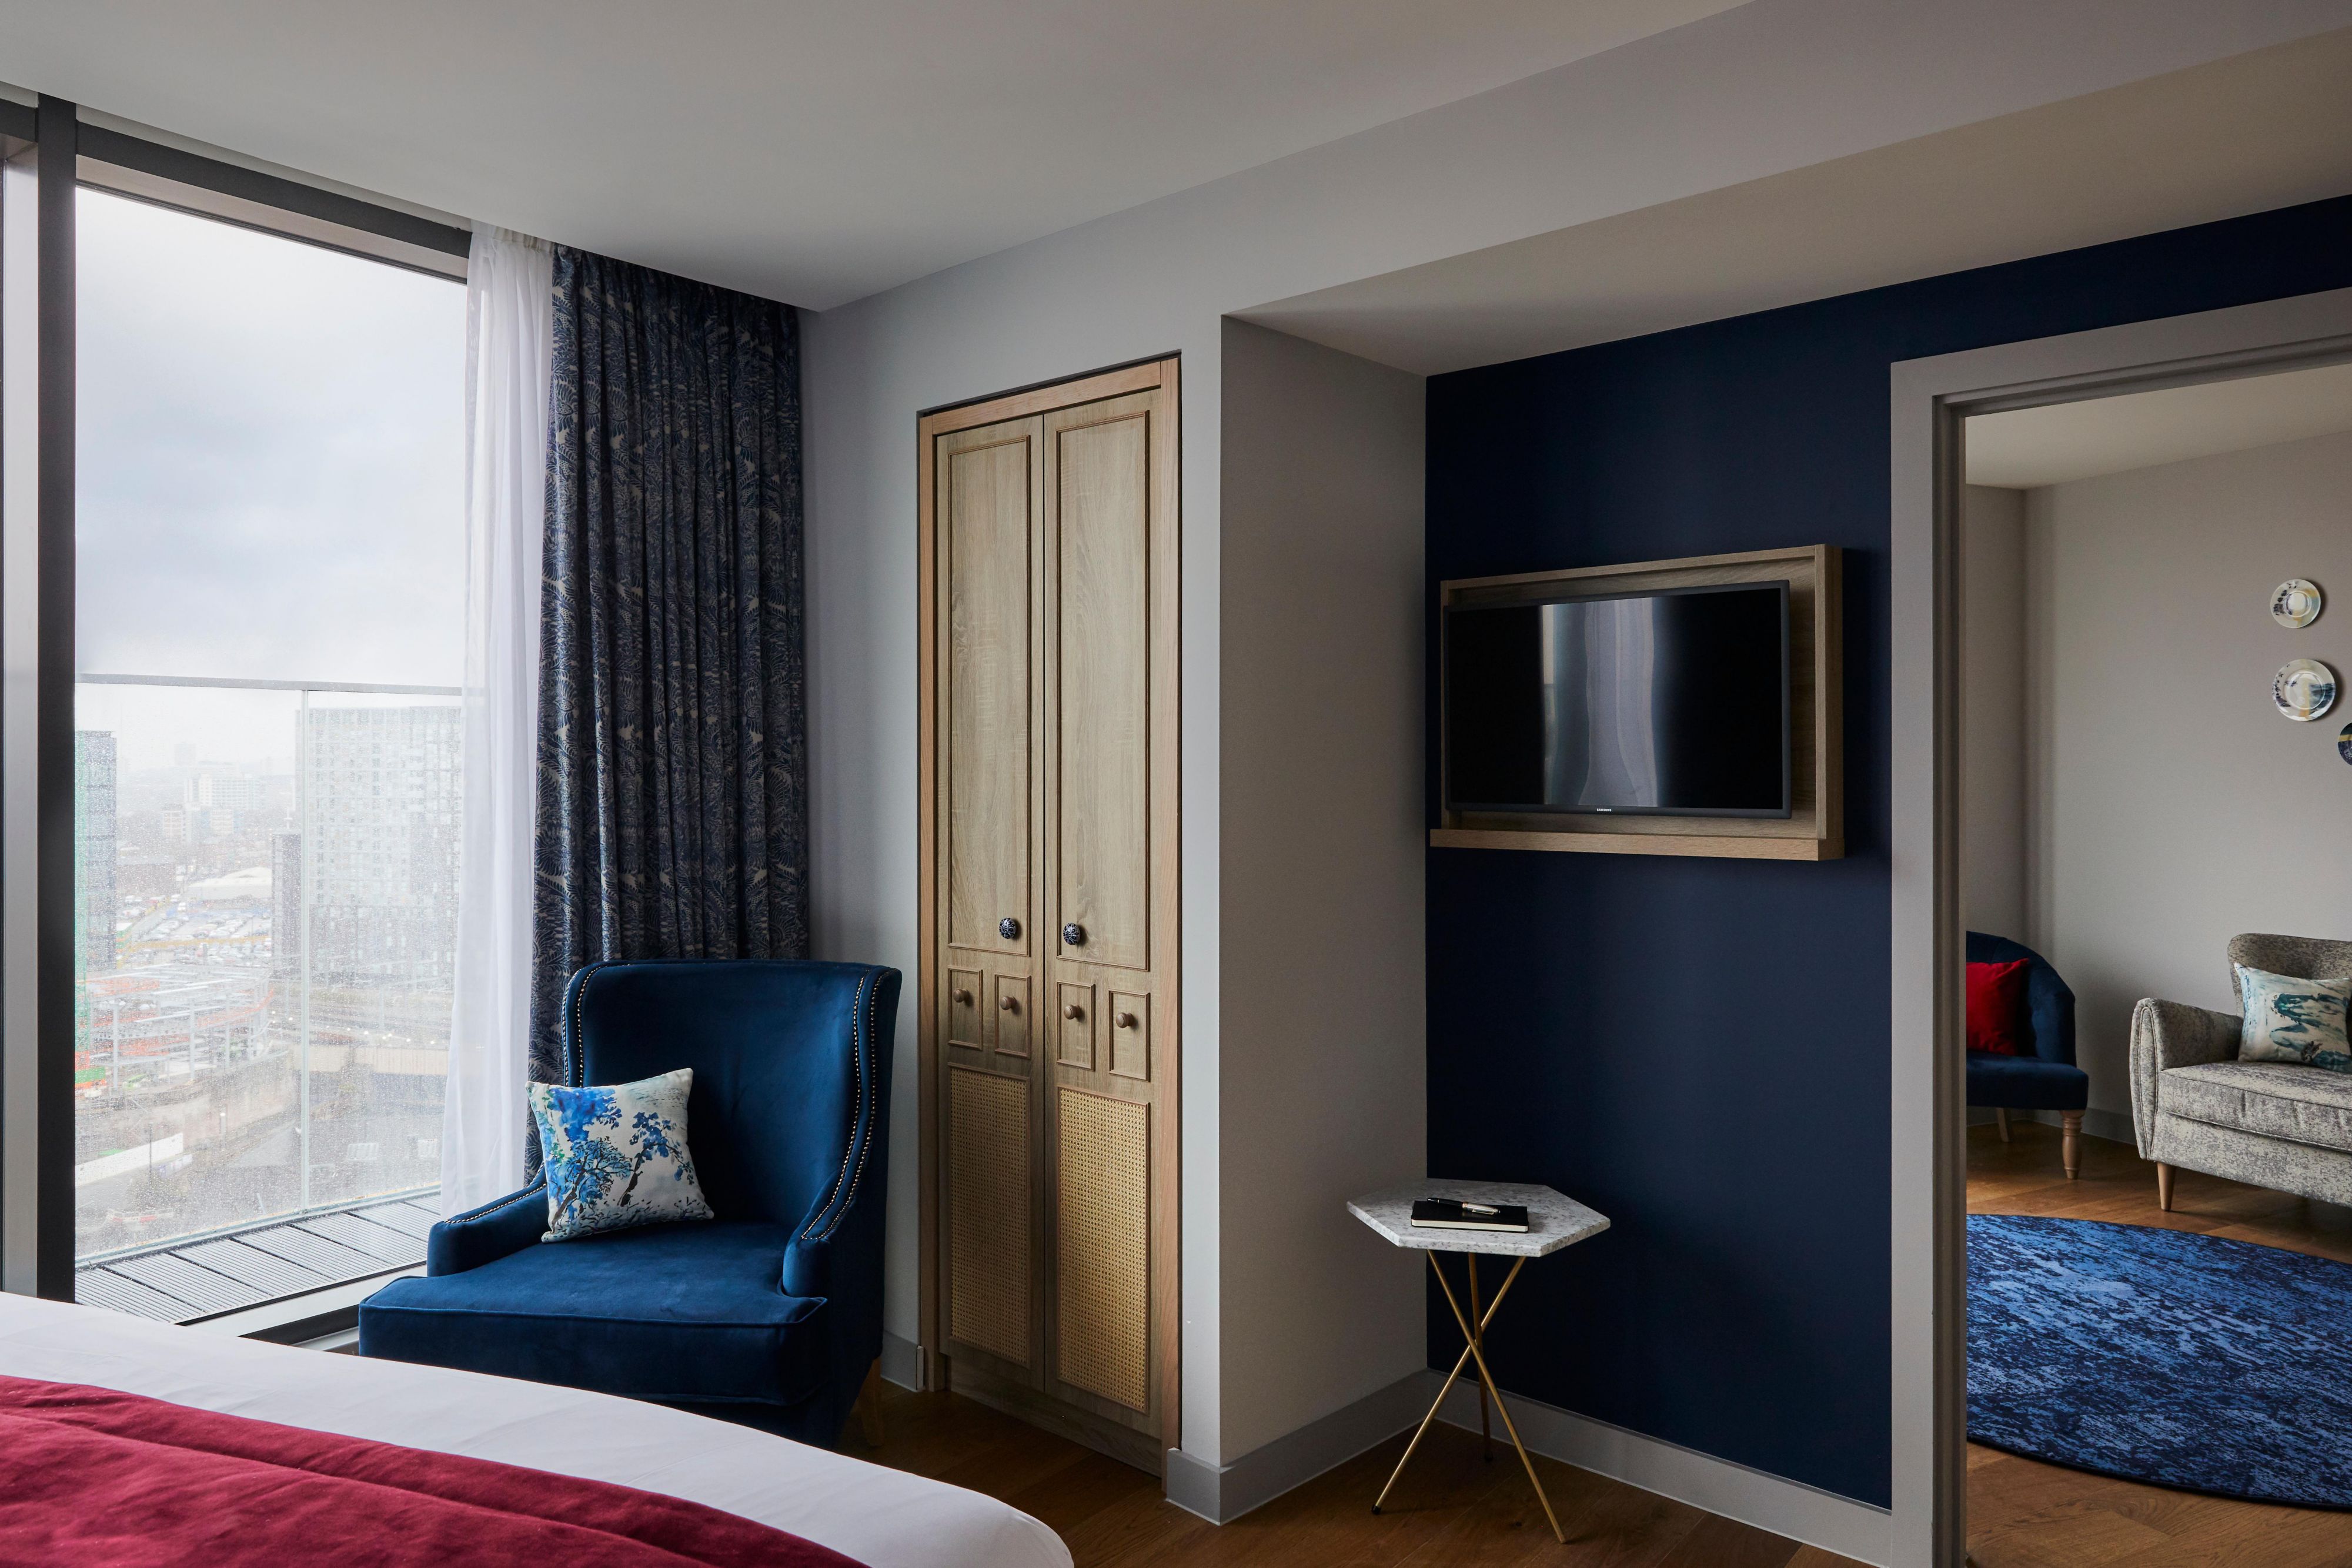 Our superb suites offer floor-to-ceiling windows with balconies accessible from the spacious lounge area, so you can enjoy the city skyline view. Relax in our uniquely designed boutique rooms inspired by the vibrant history of the local neighbourhood.